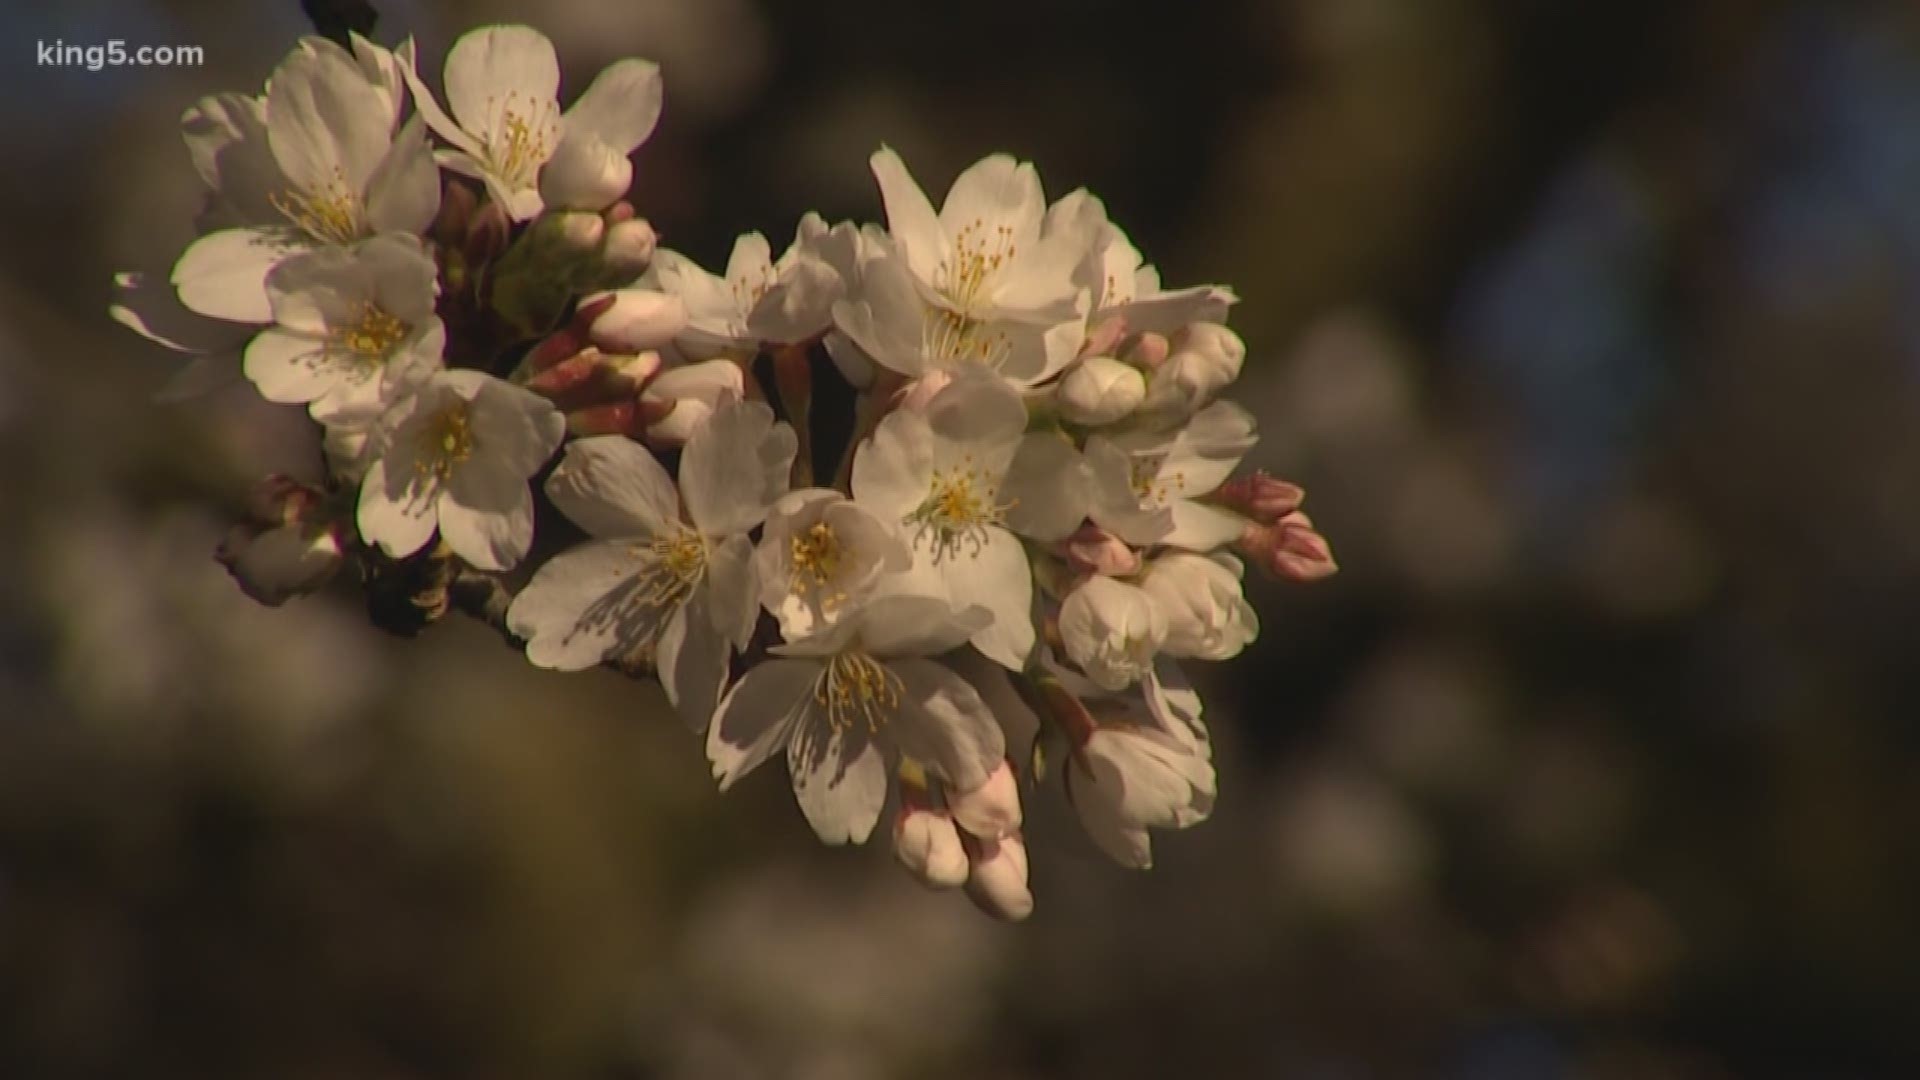 With spring in the air, cherry blossoms are in bloom.  KING 5 Meteorologist Ben Dery has some tips for where to see the best displays around western Washington.